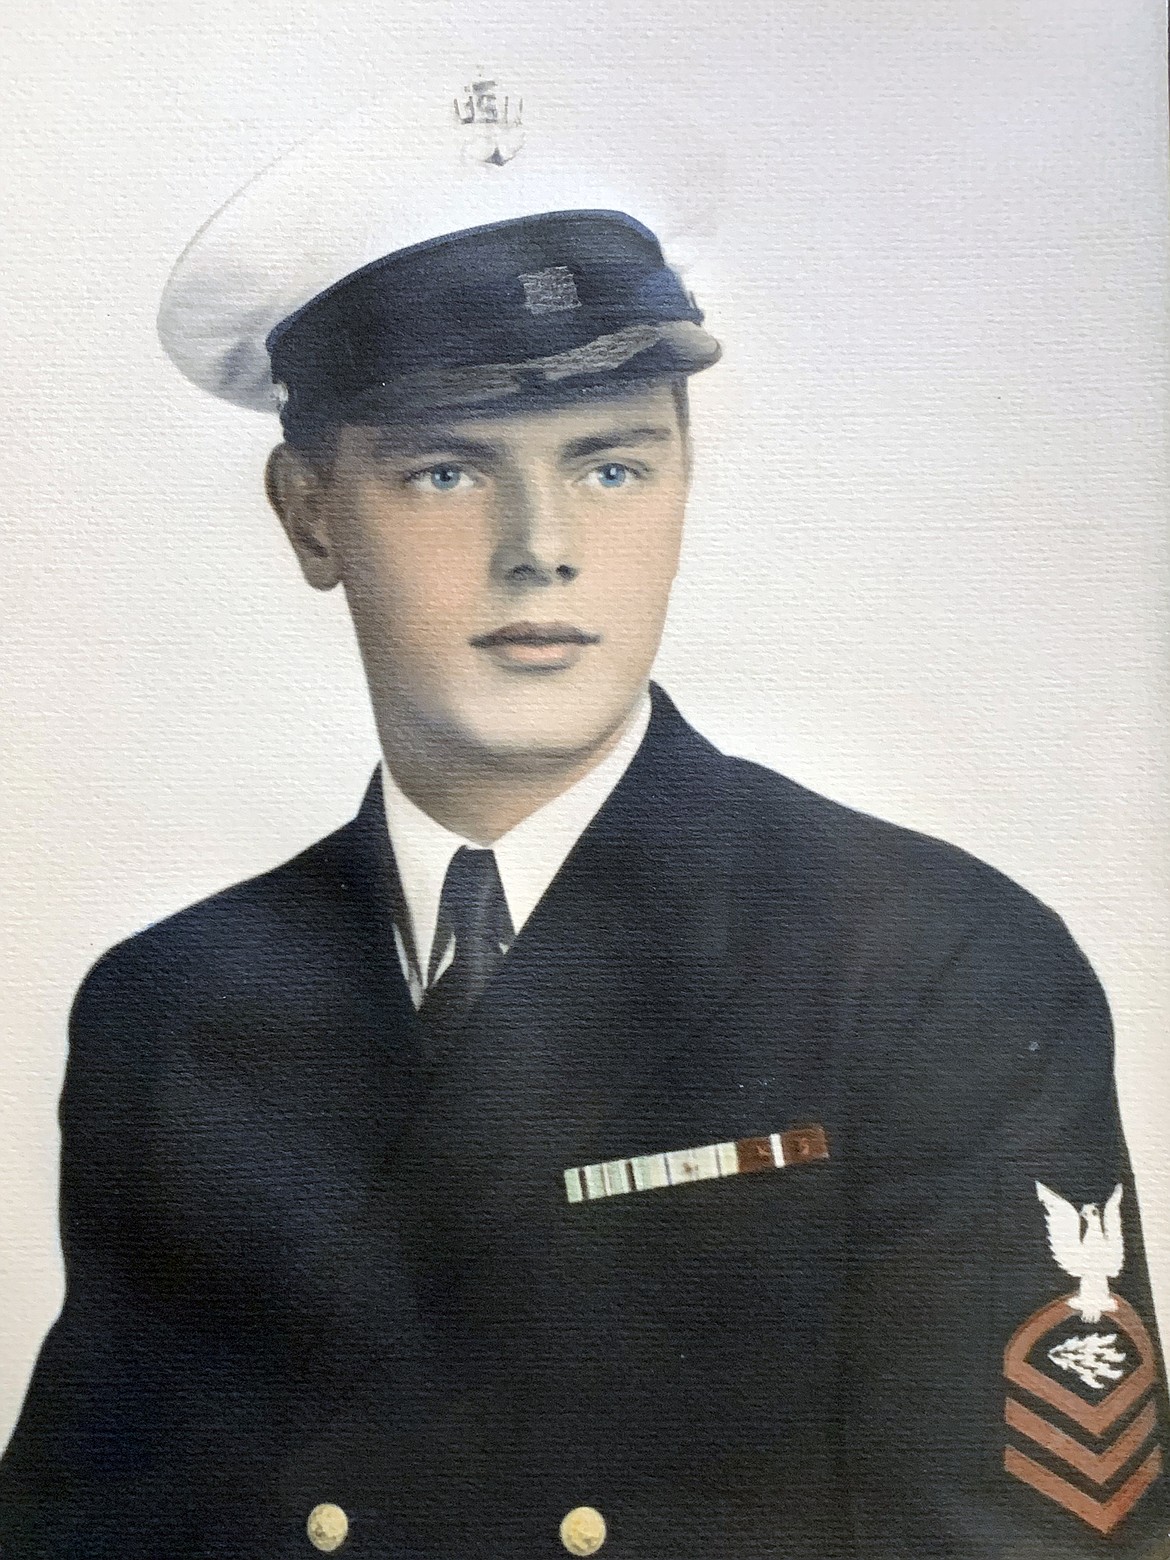 Arnold Peterson saw heavy combat on multiple occasions during his time in the pacific aboard the destroyer U.S.S. Healy during World War II. (photo provided)